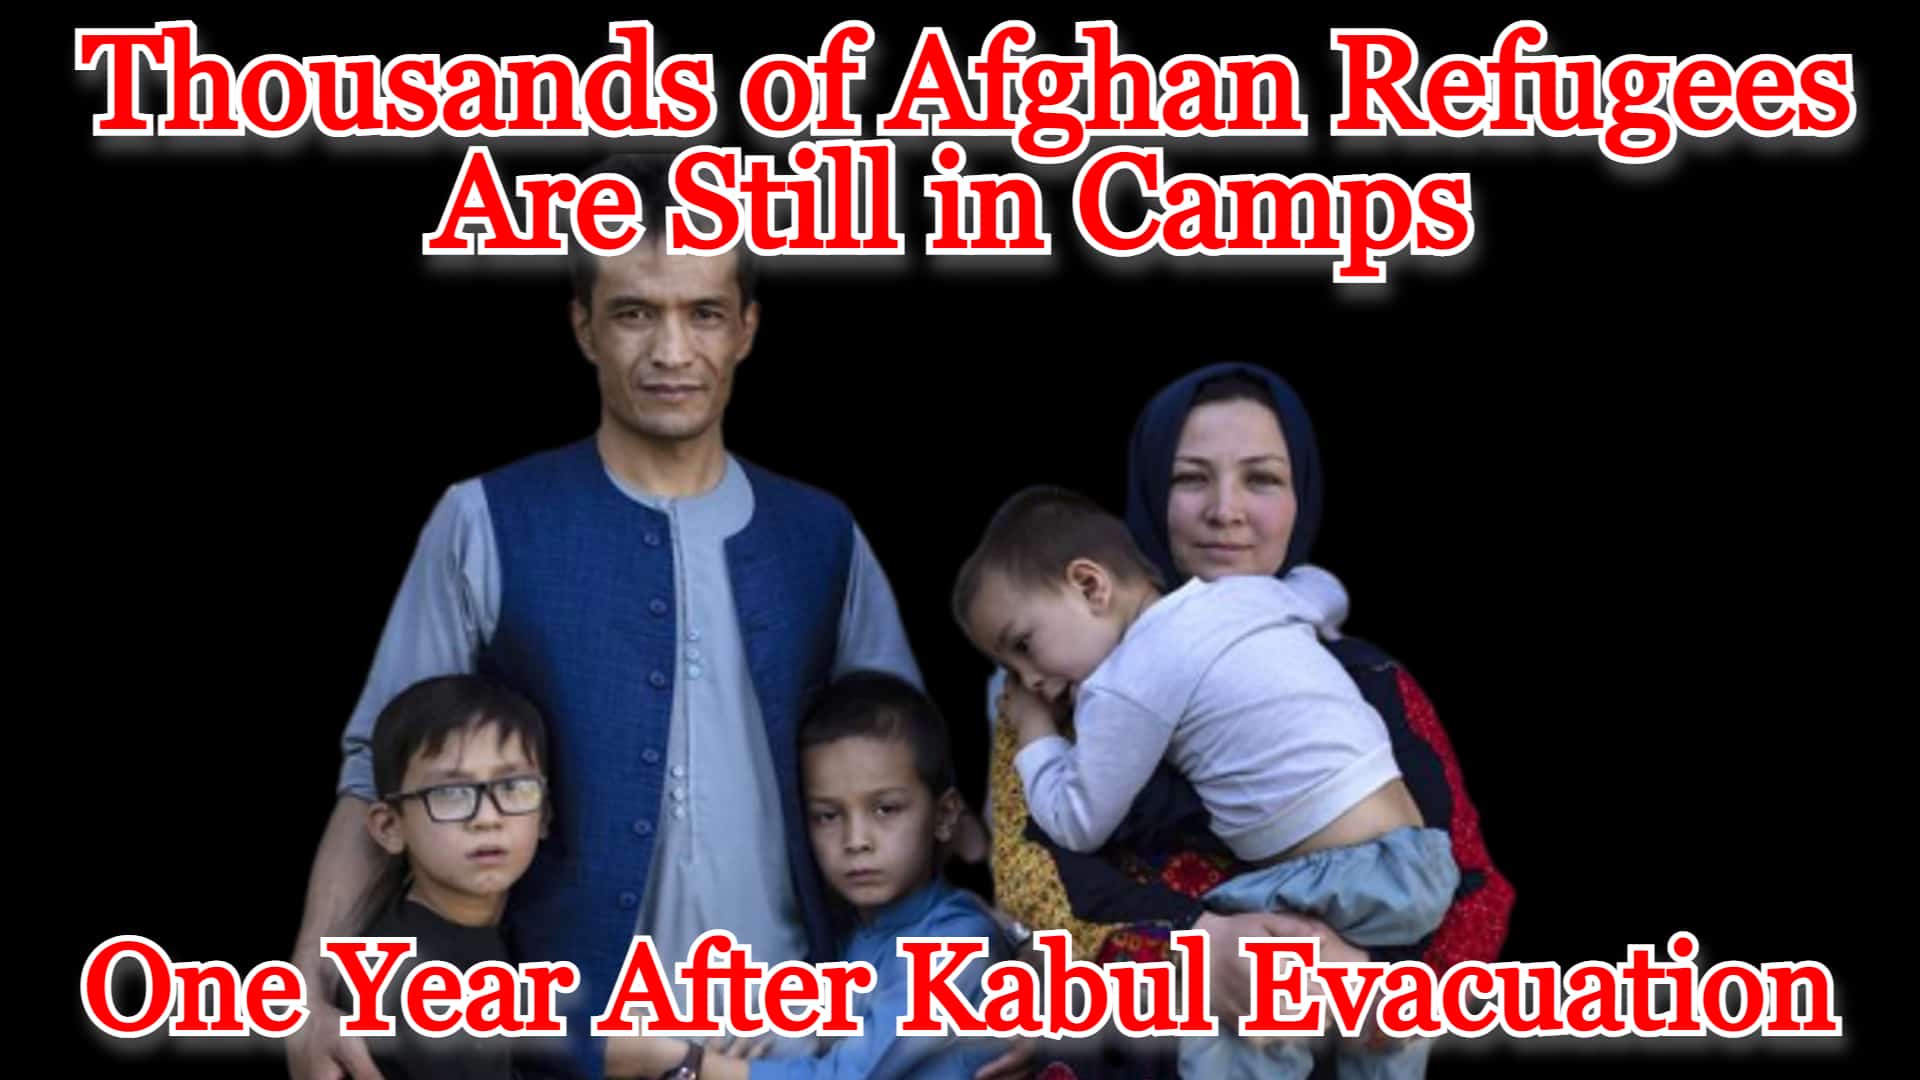 COI #319: Thousands of Afghan Refugees Are Still in Camps One Year After Kabul Evacuation